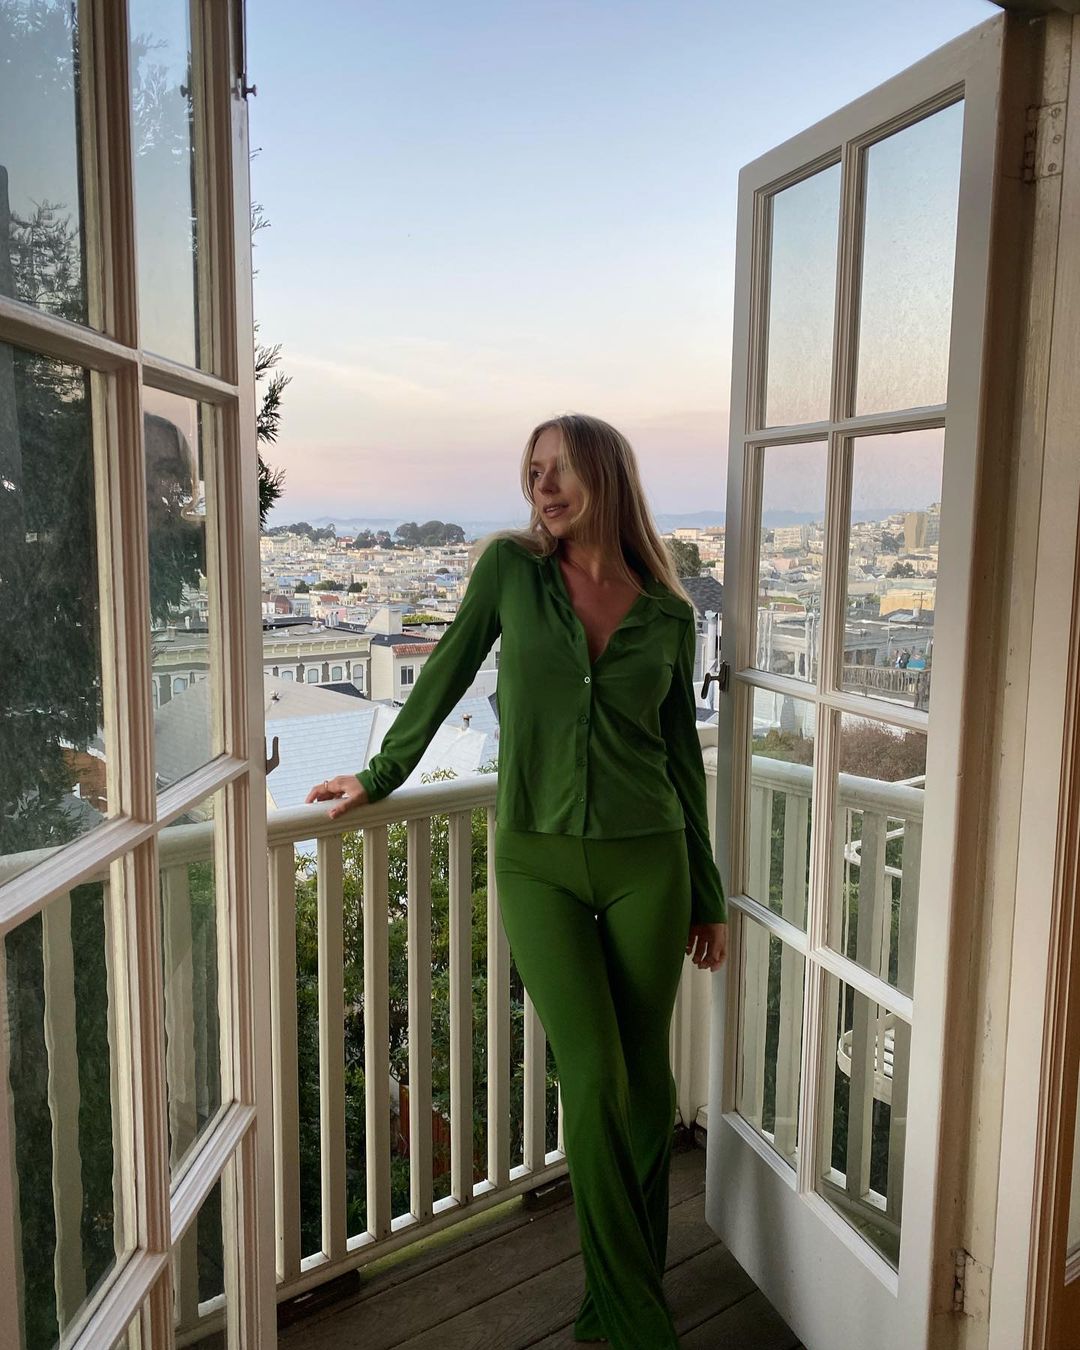 Spring 2022 Outfit Trends: @amandasorensonn wears a Kelly green co-ord